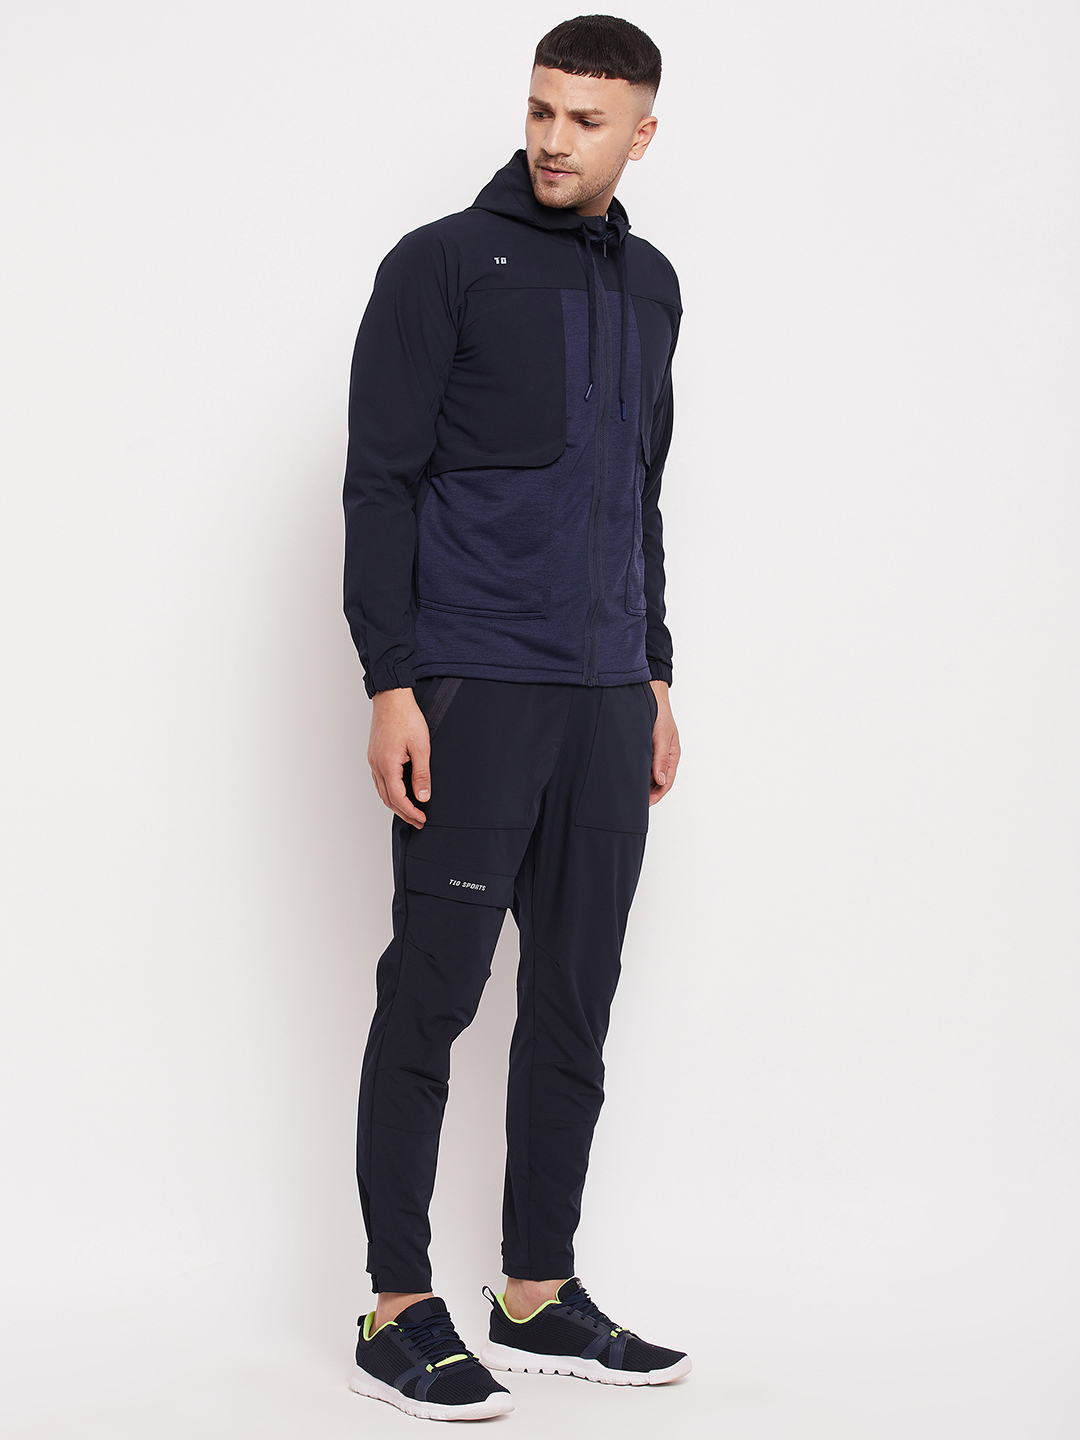 Cargo Track Top Upper – Navy Blue - T10 Sports